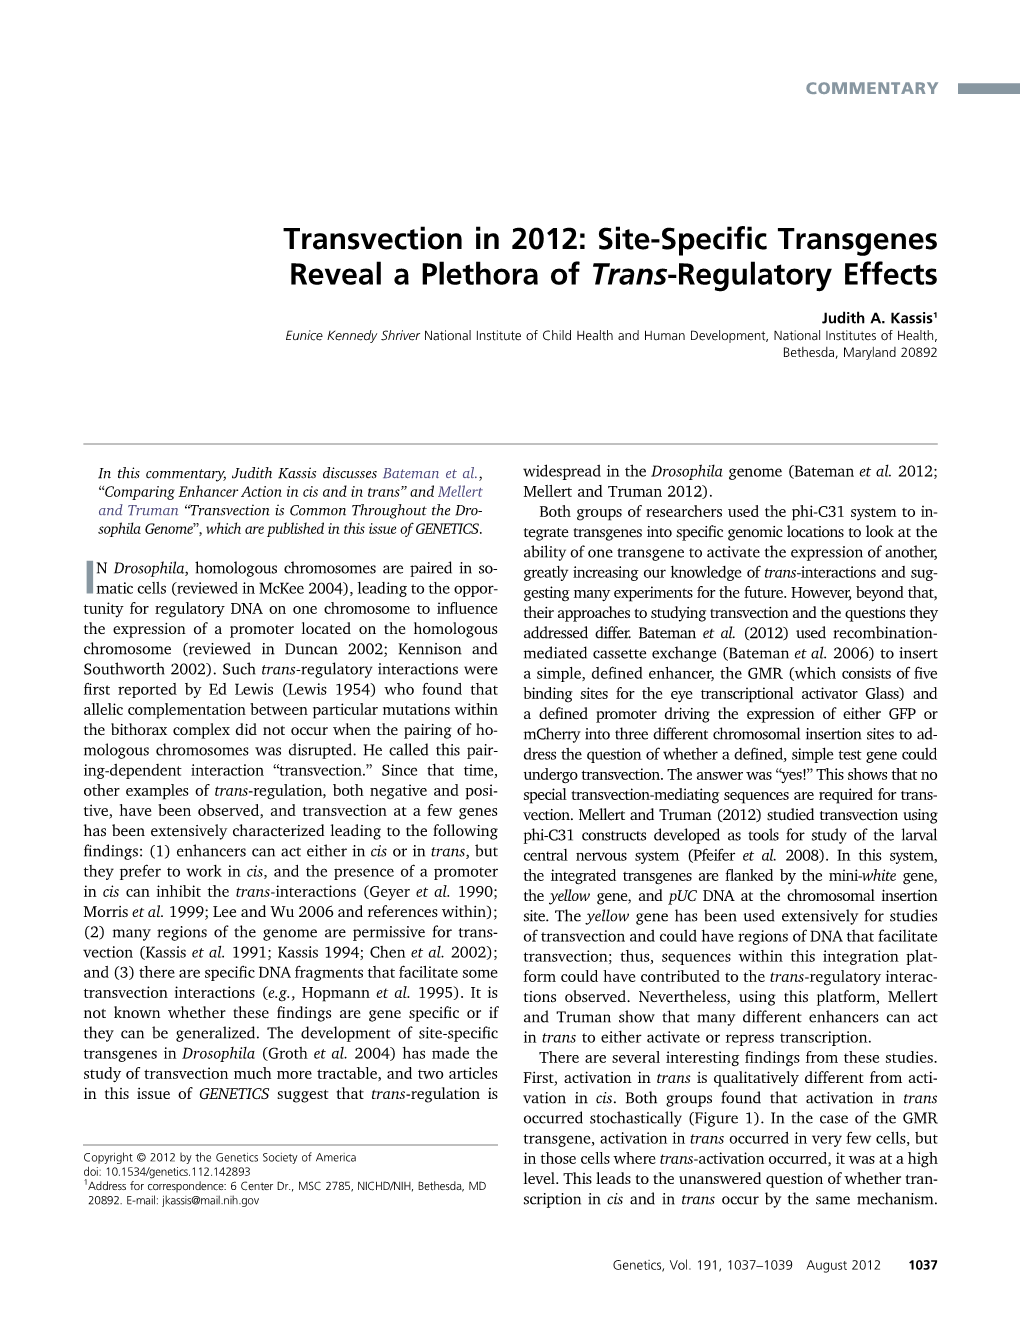 Transvection in 2012: Site-Specific Transgenes Reveal a Plethora of Trans-Regulatory Effects